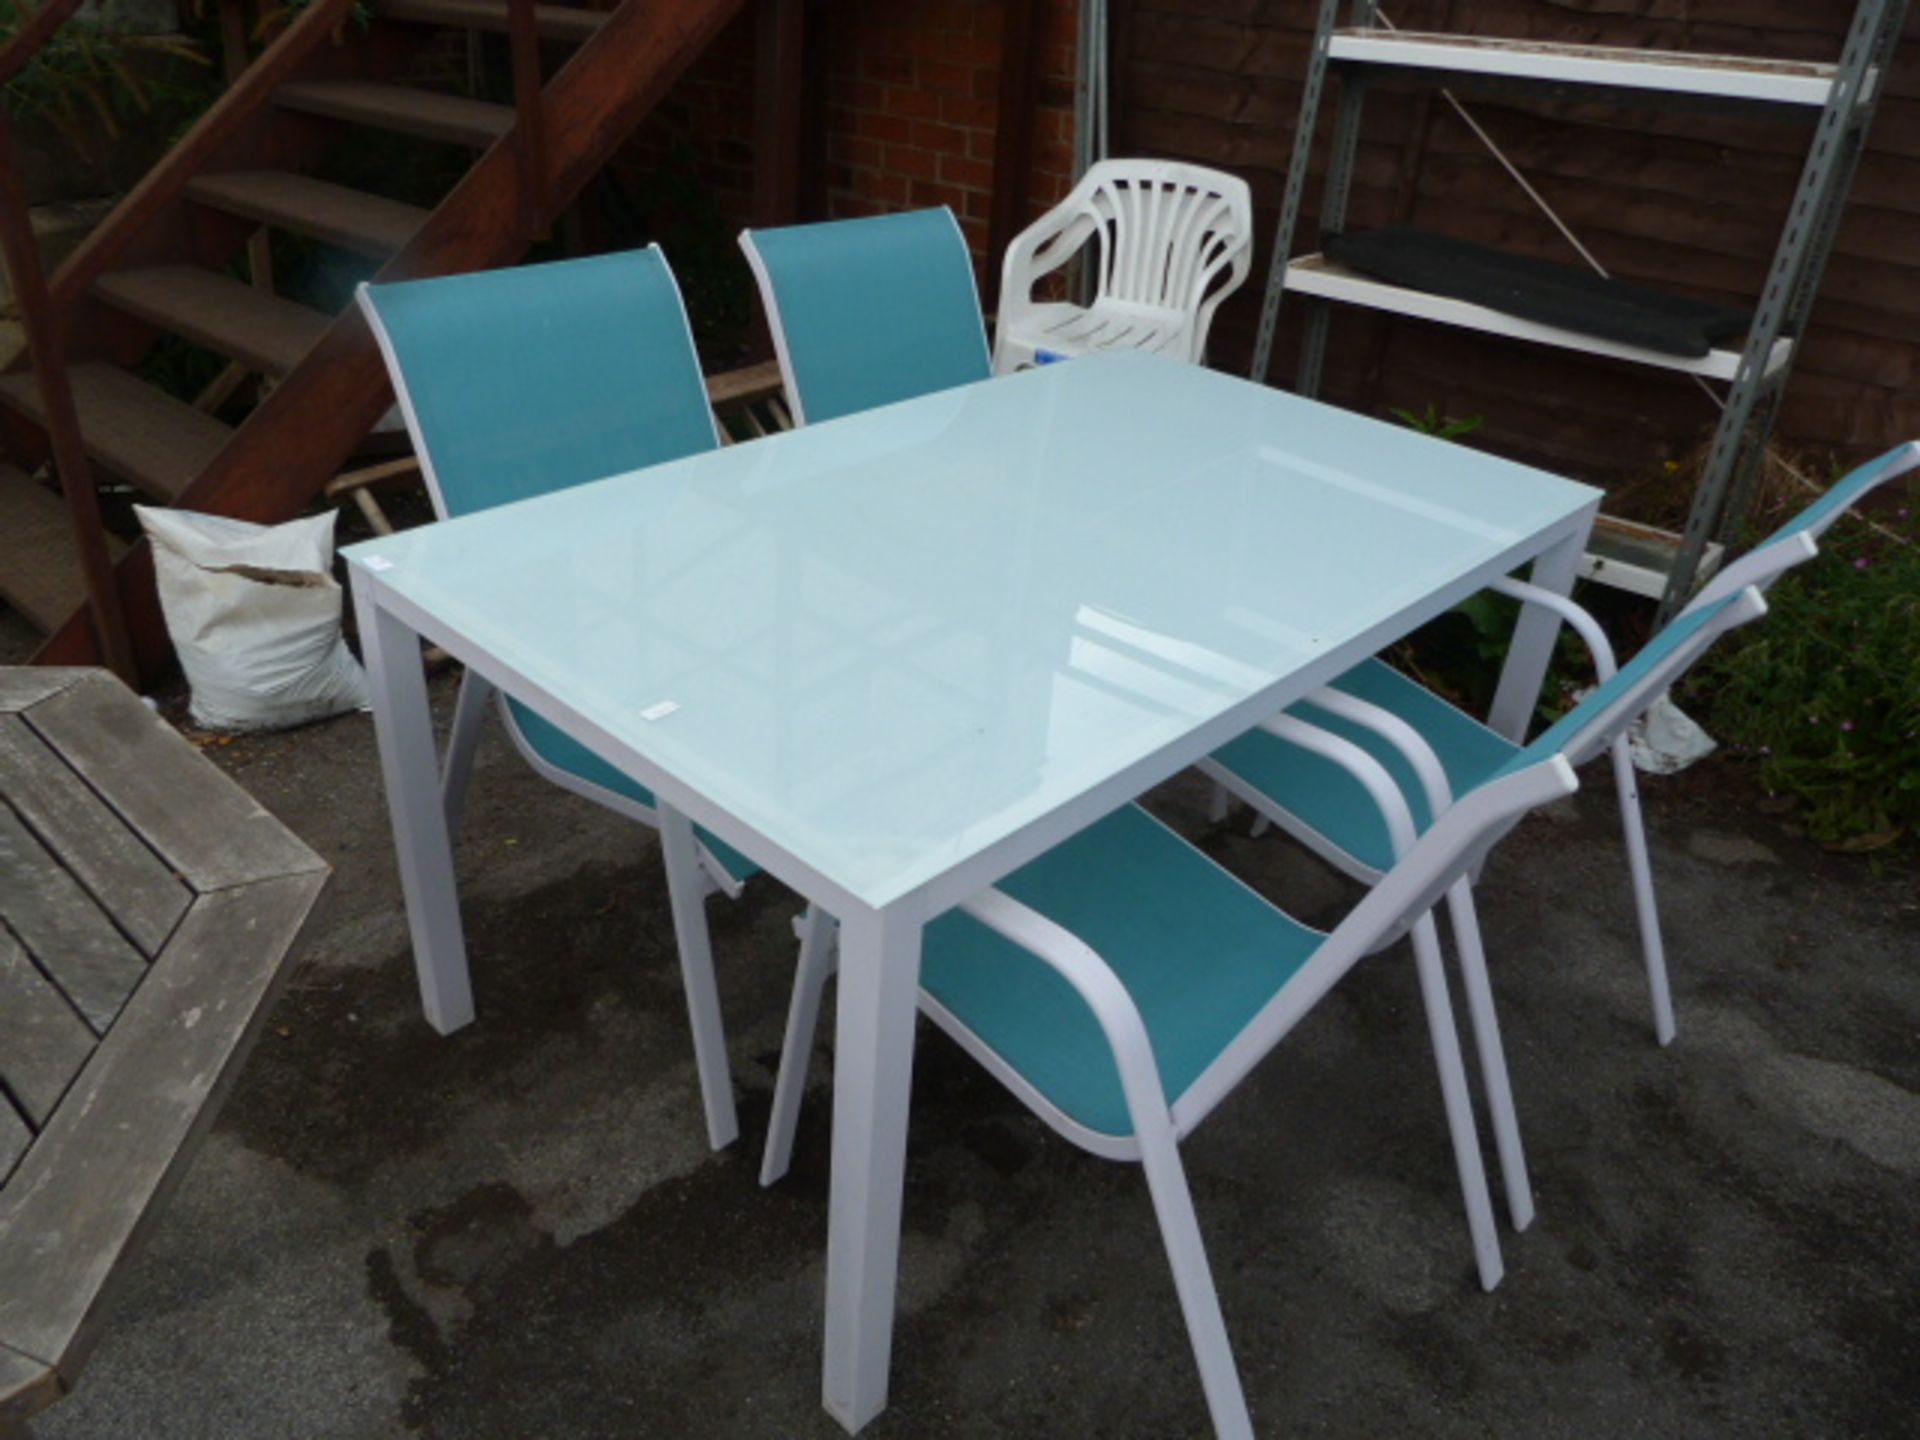 White Based Glass Topped Rectangular Patio Table with 4 Blue and White Chairs